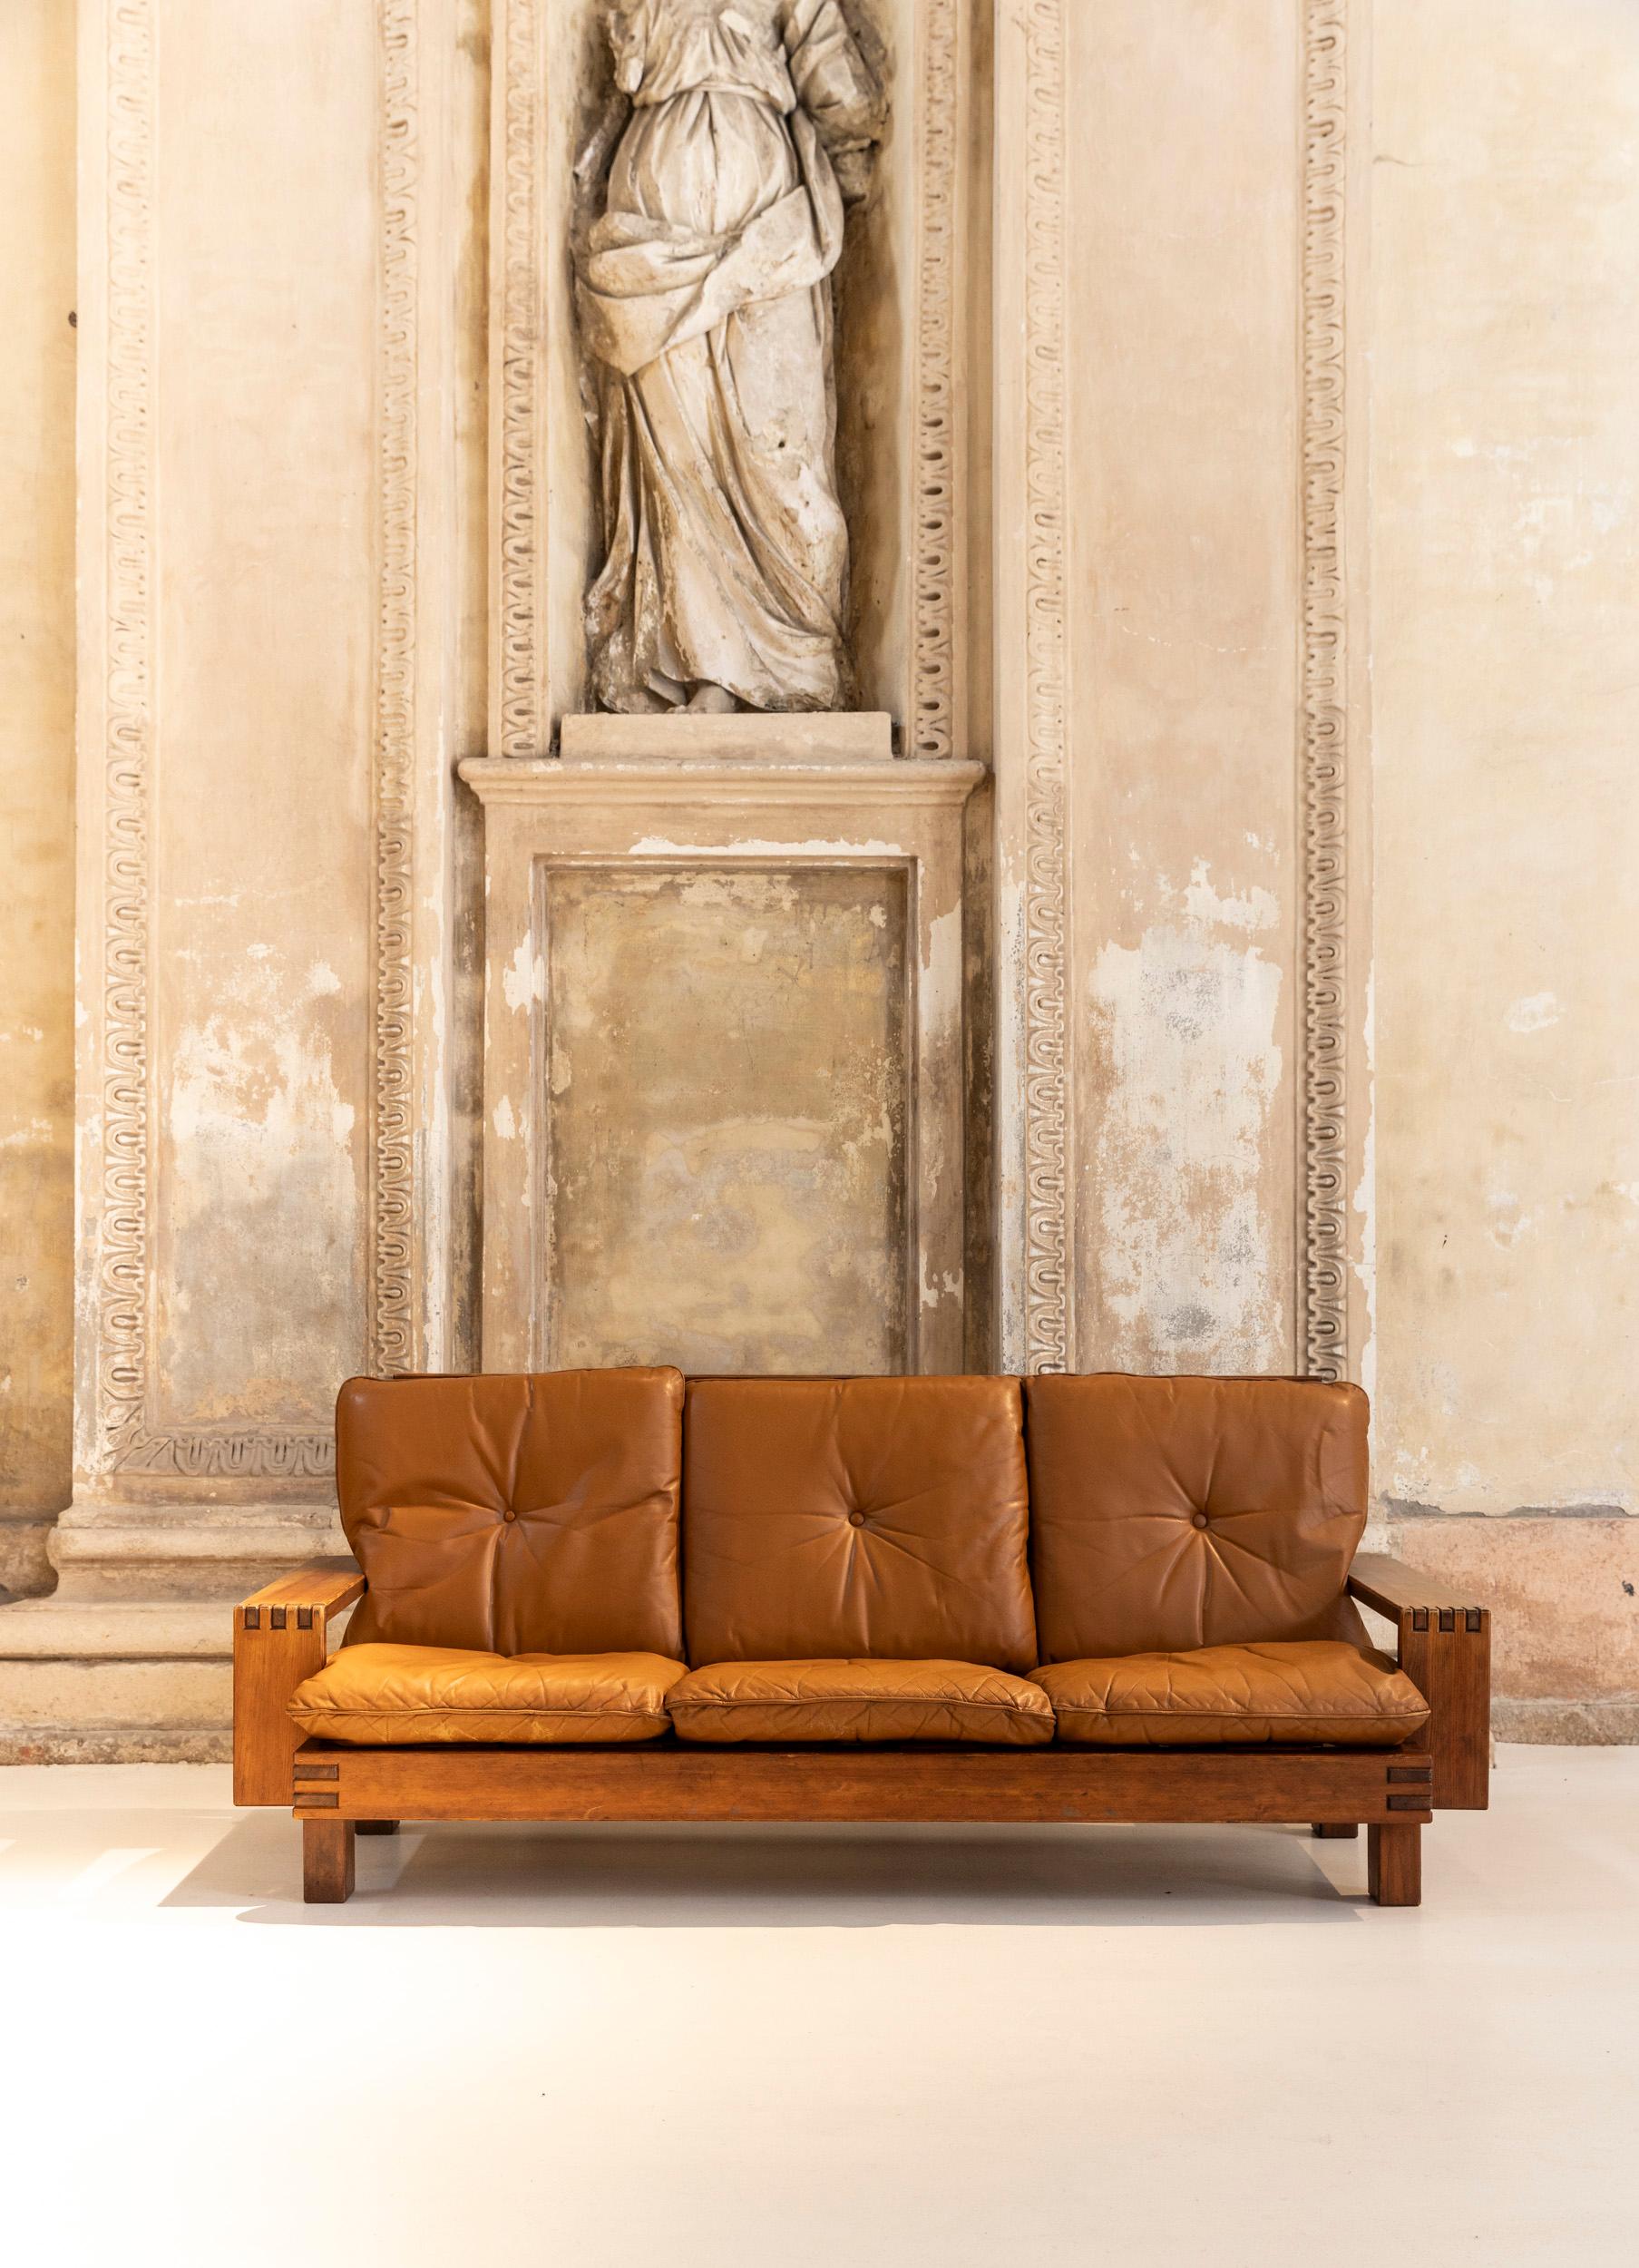 Iconic wooden sofa by Giuseppe Rivadossi for Officina Rivadossi. 
Leather upholstered.
The sofa shows the high-level of craftsmanship for which Giuseppe Rivadossi is known.